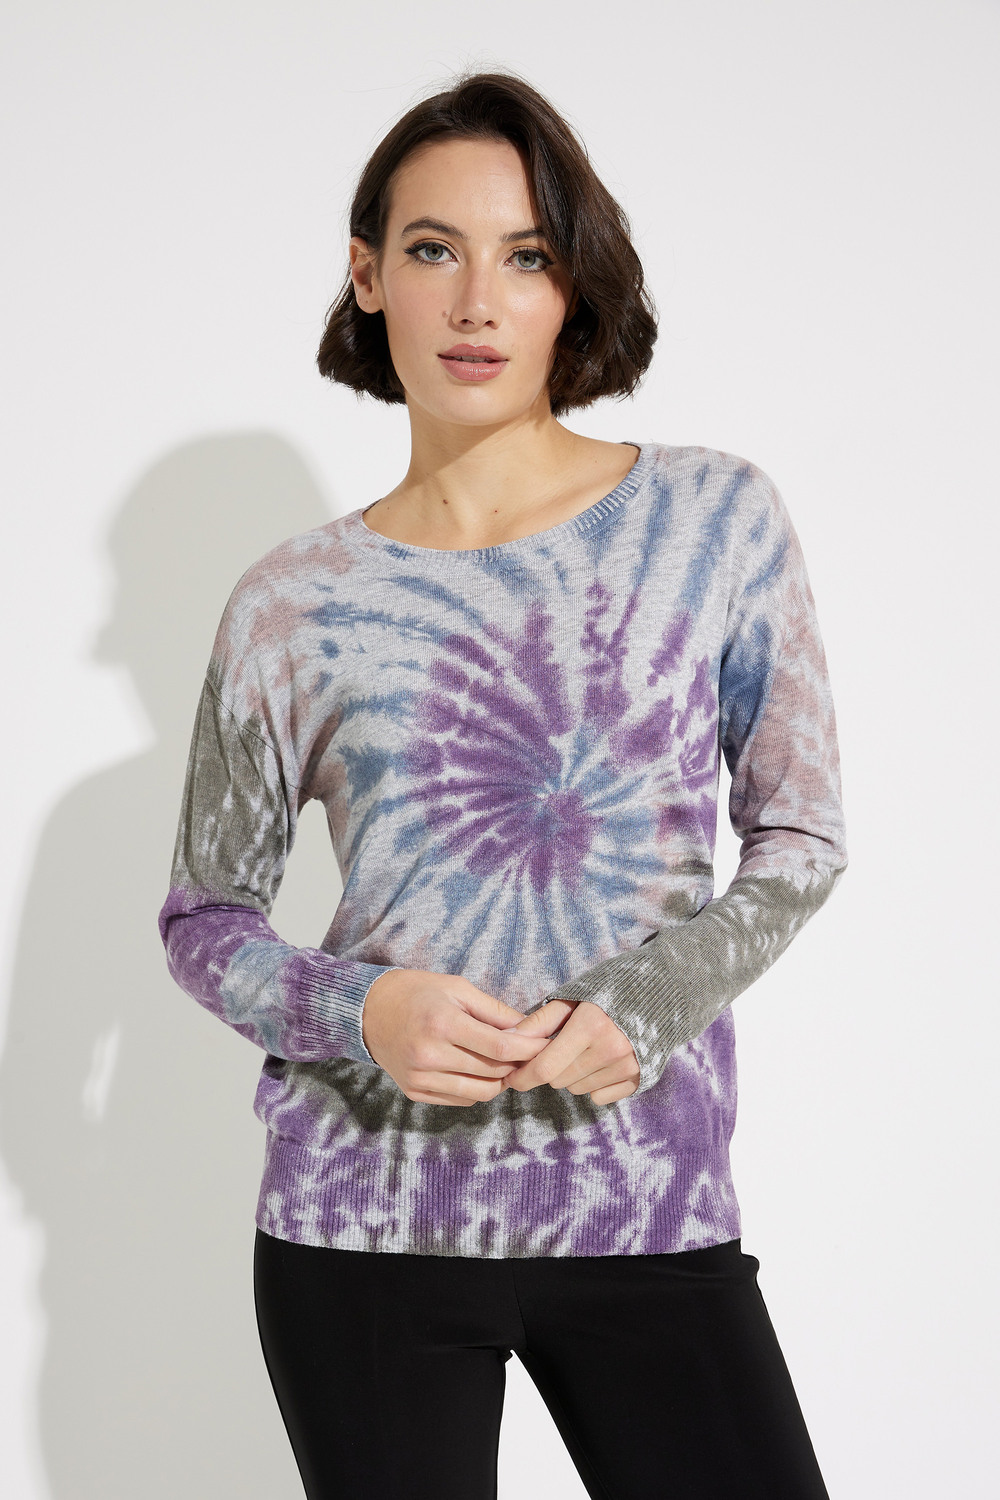 Relaxed Fit Tie Die Sweater Style EW29058. Multi